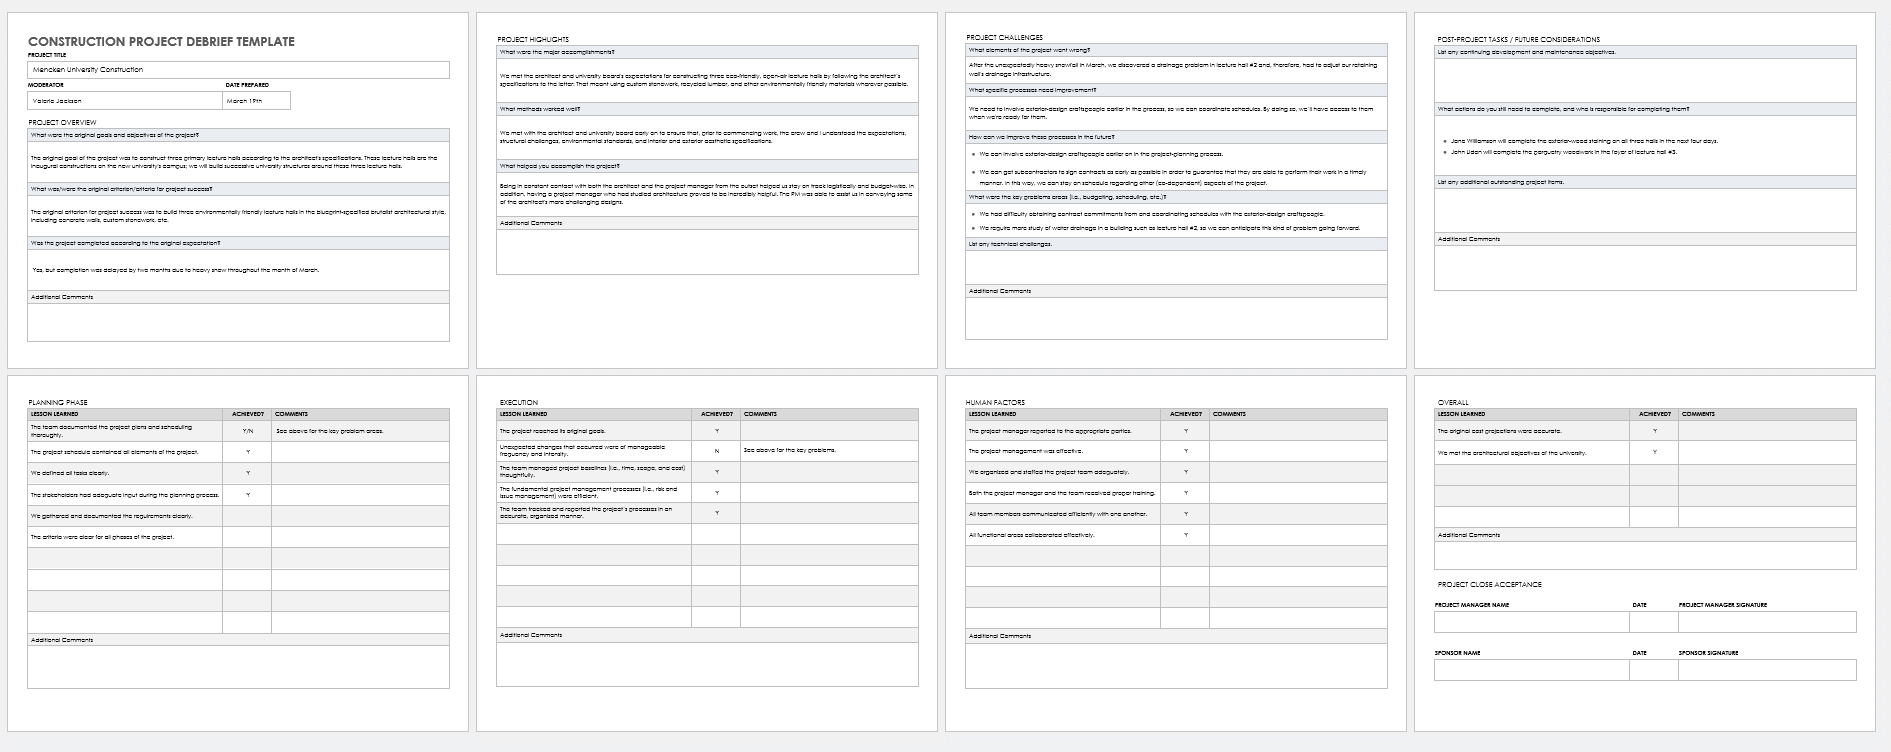 Construction Project Debrief Template